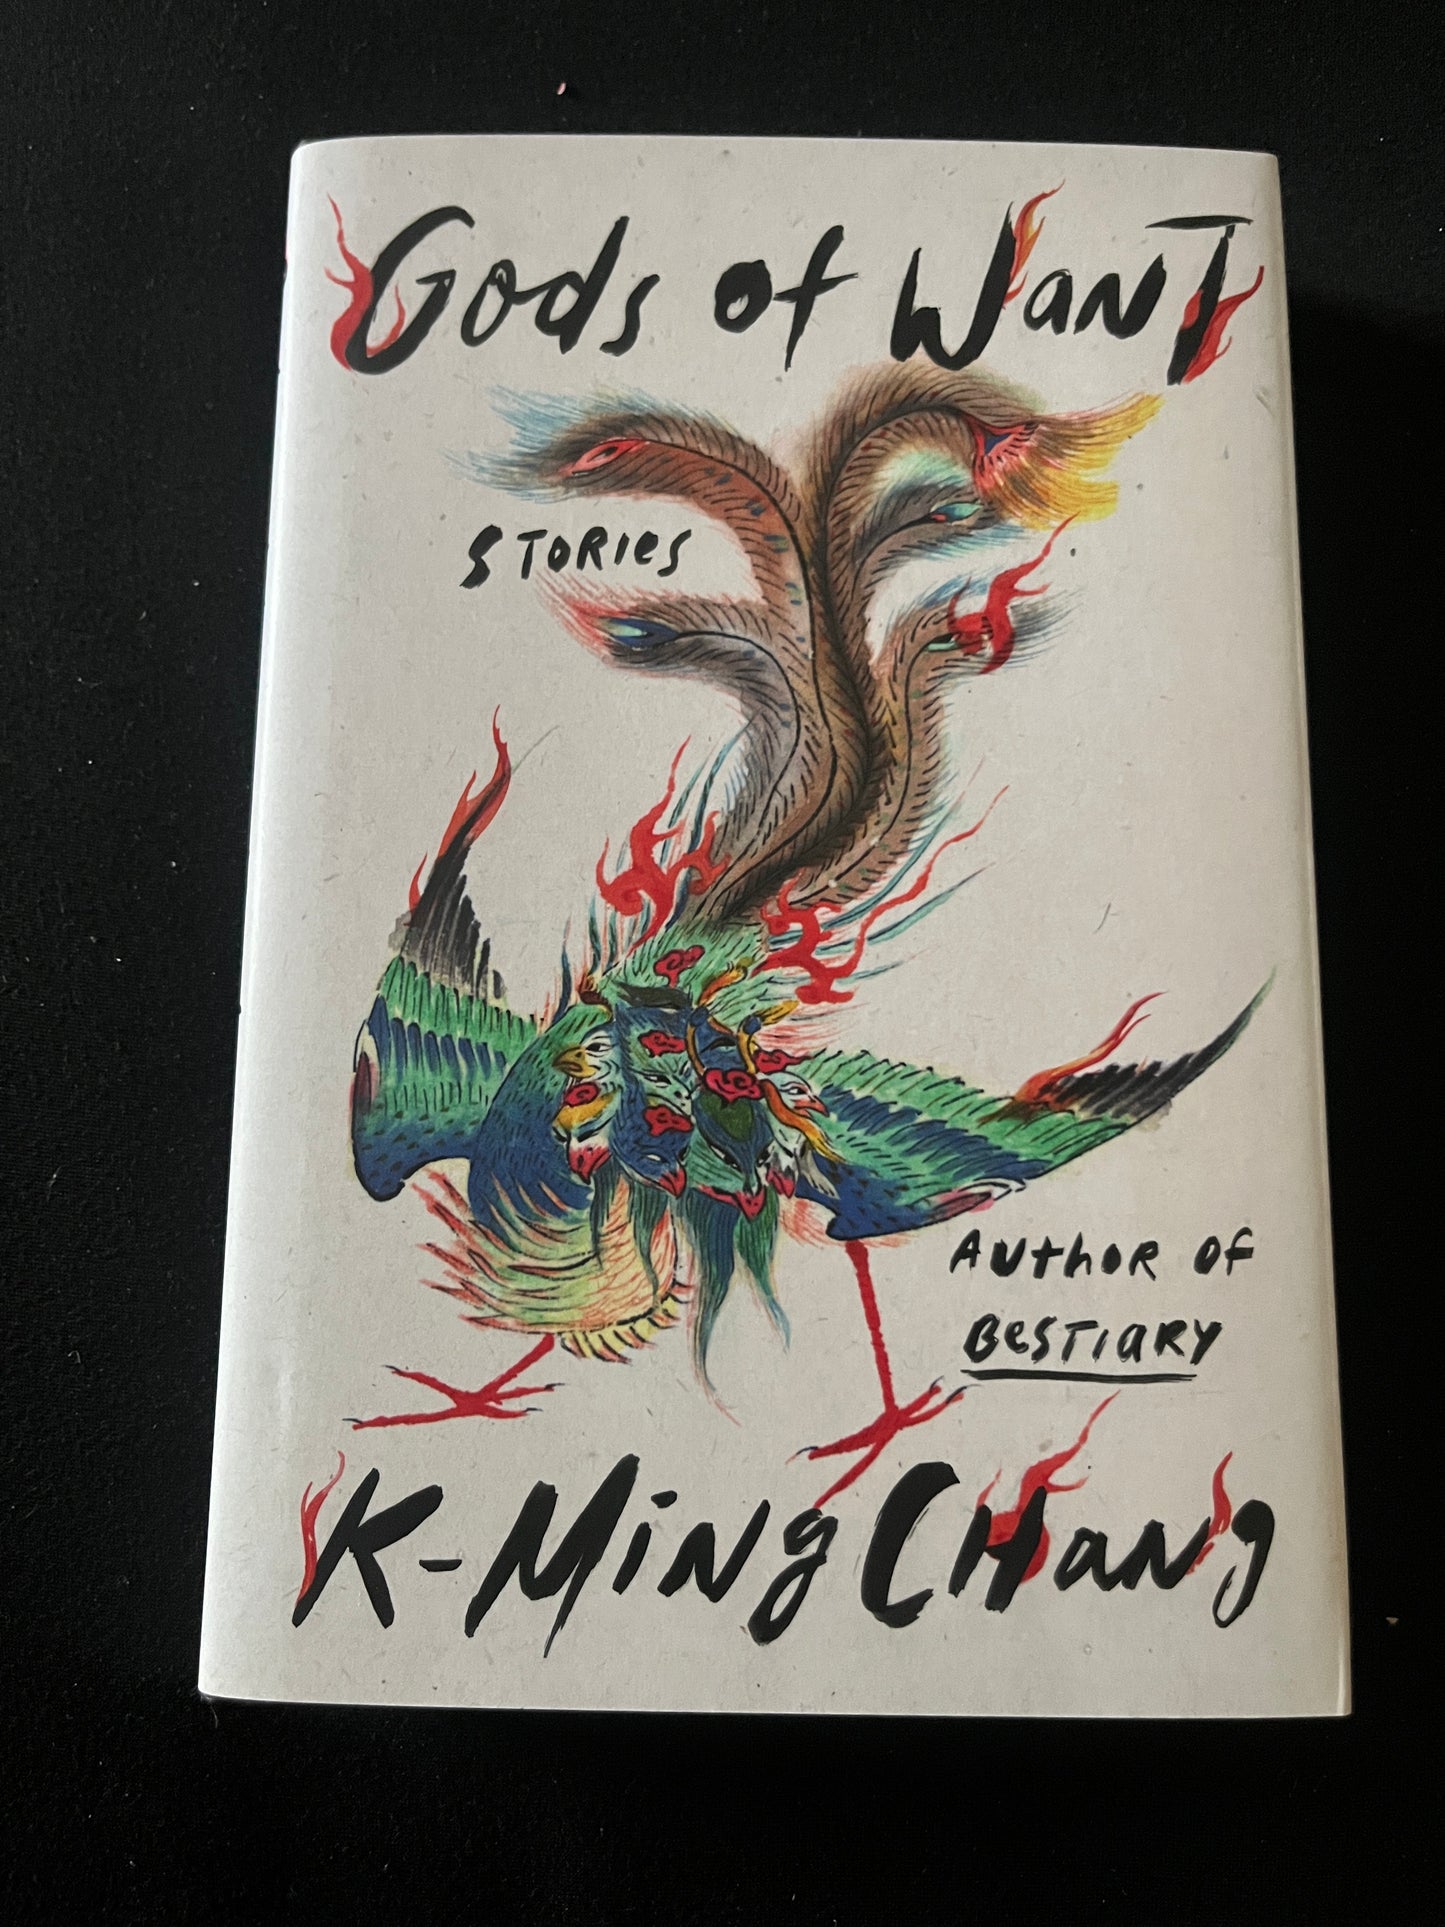 GODS OF WANT by K-Ming Chang